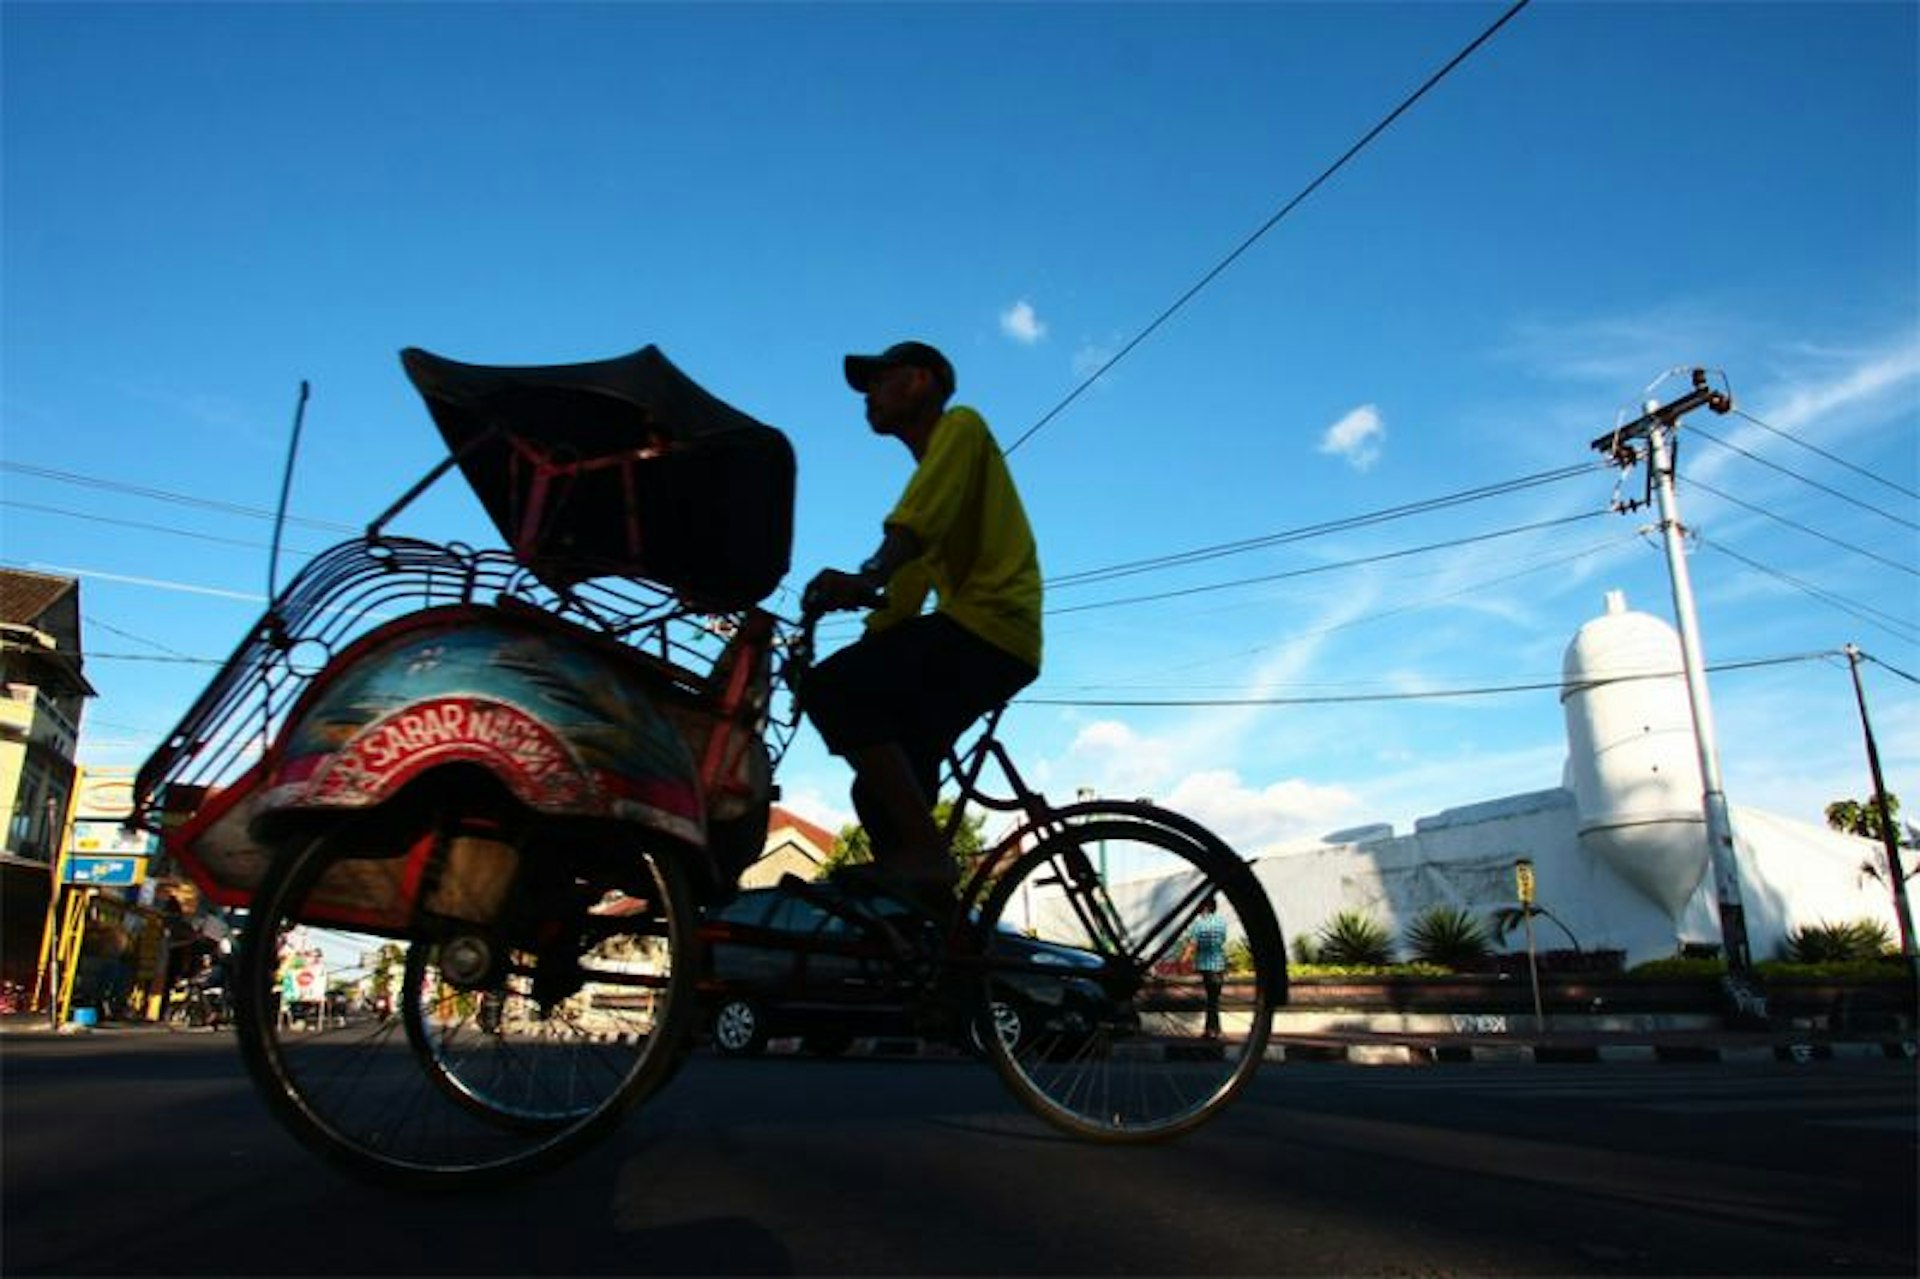 A traditional rickshaw rides through the streets of Indonesia